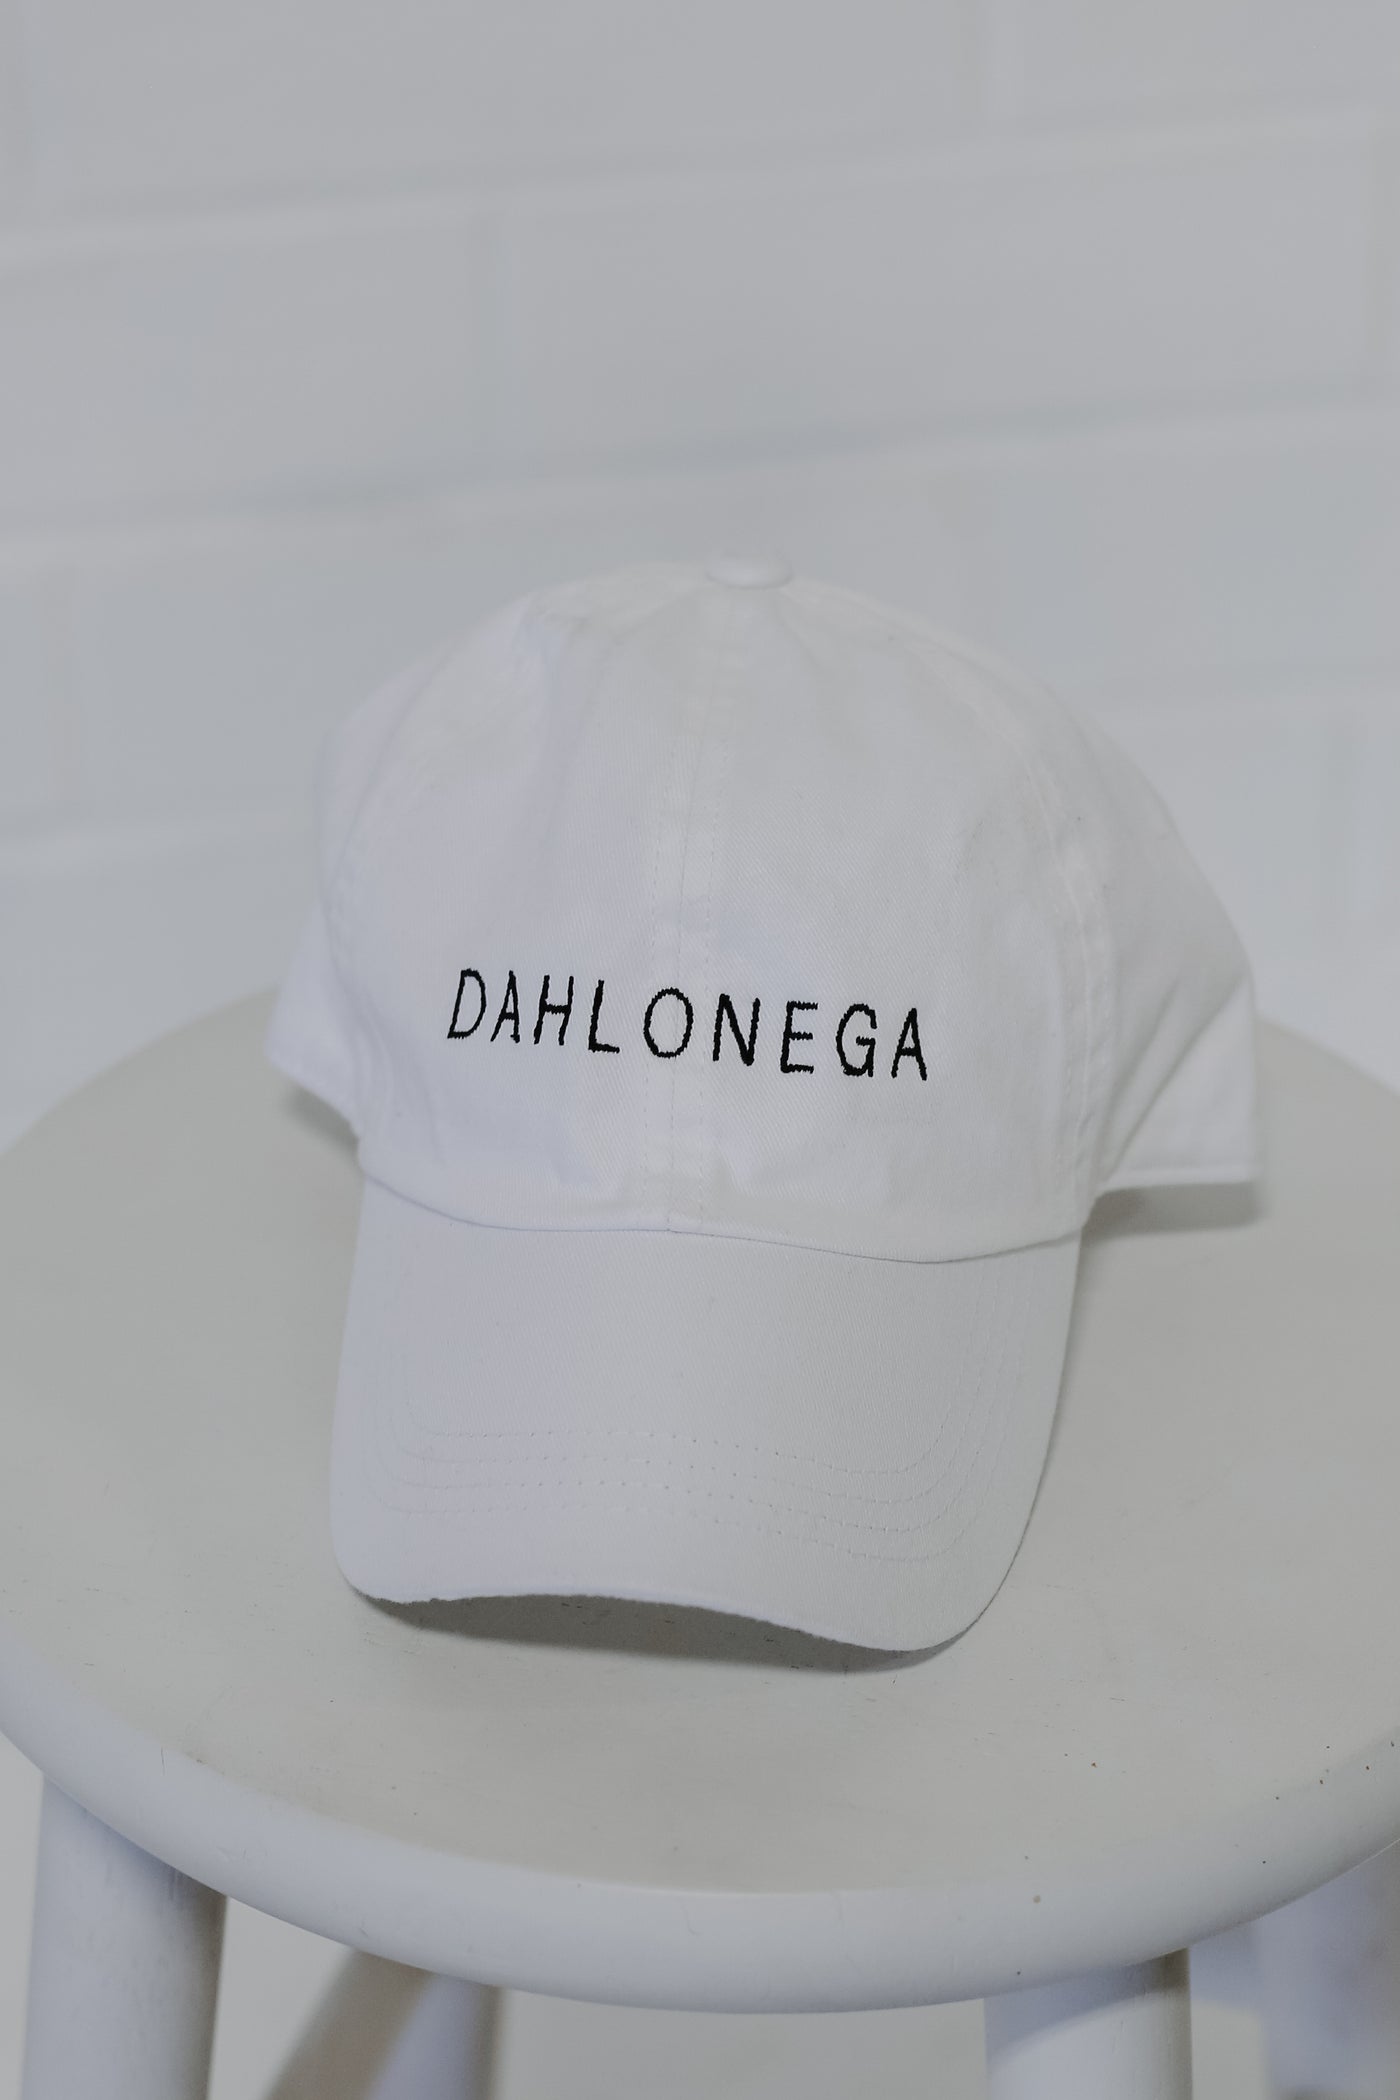 Dahlonega Embroidered Hat in white flat lay